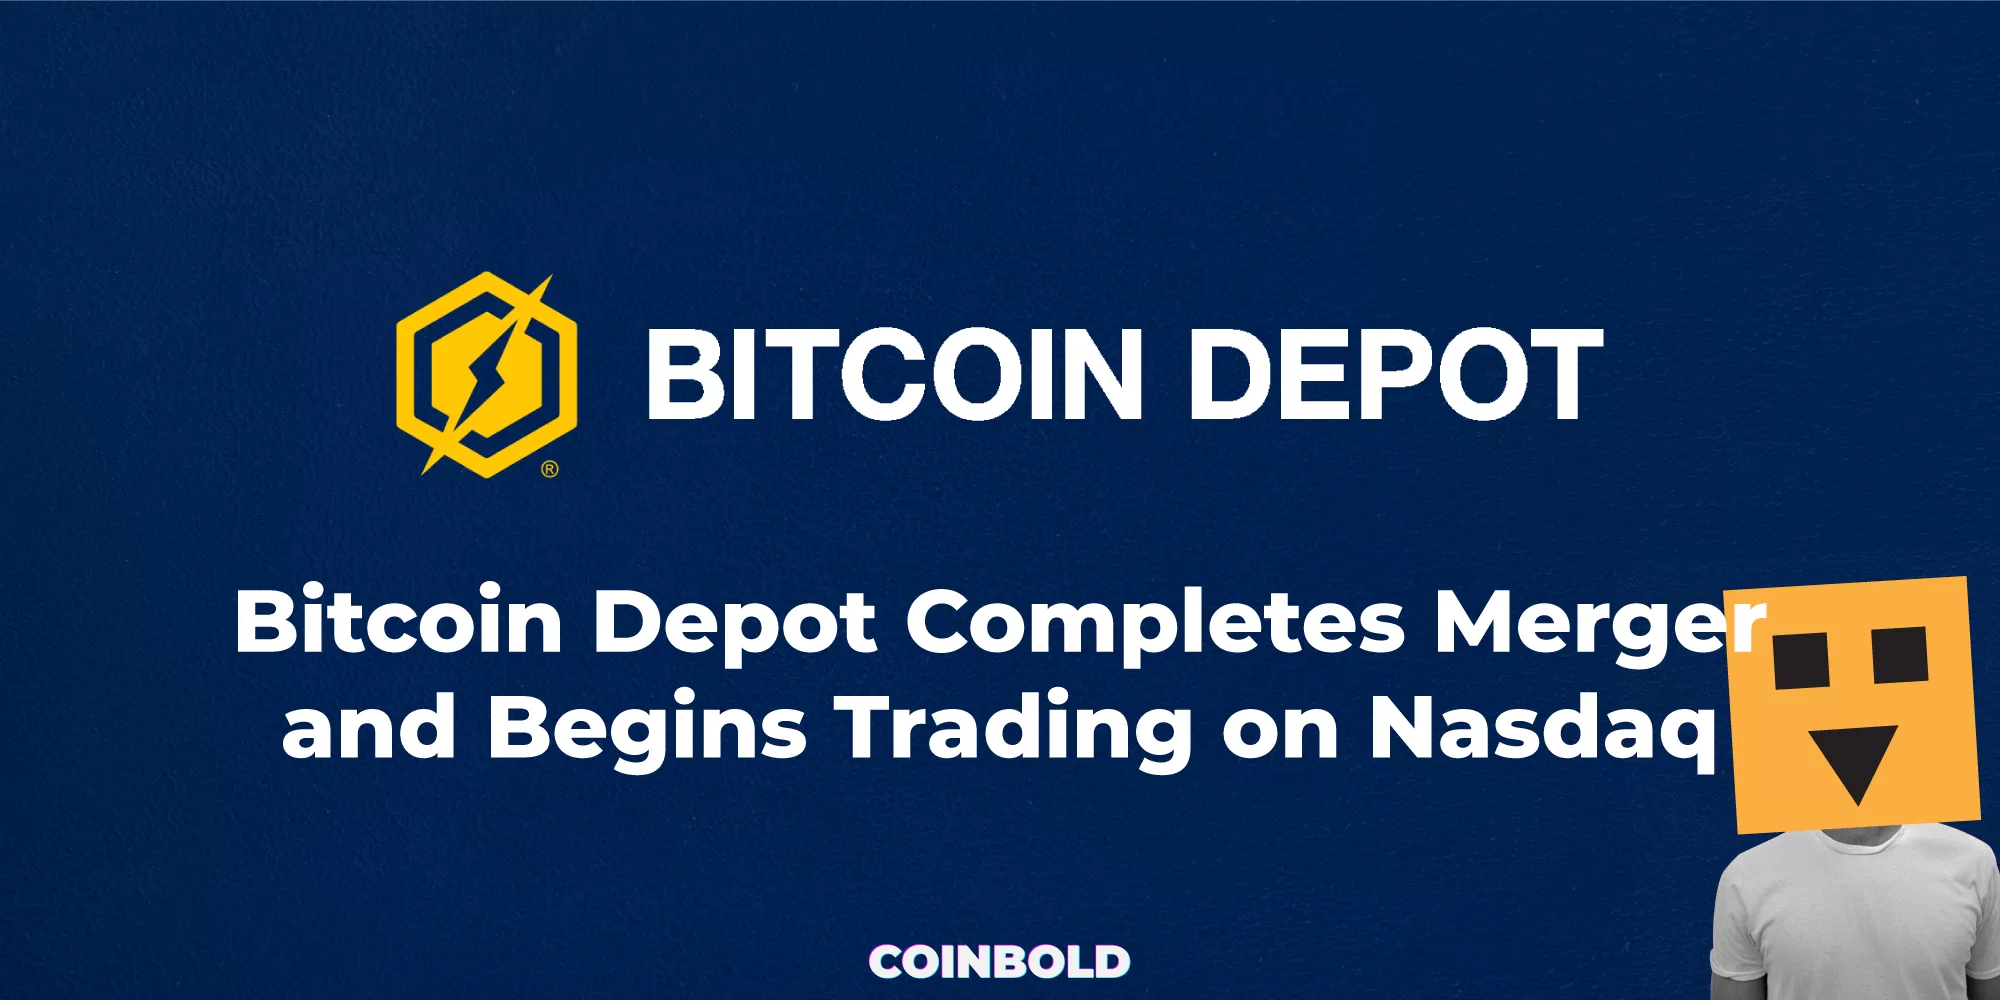 Bitcoin Depot Completes Merger and Begins Trading on Nasdaq